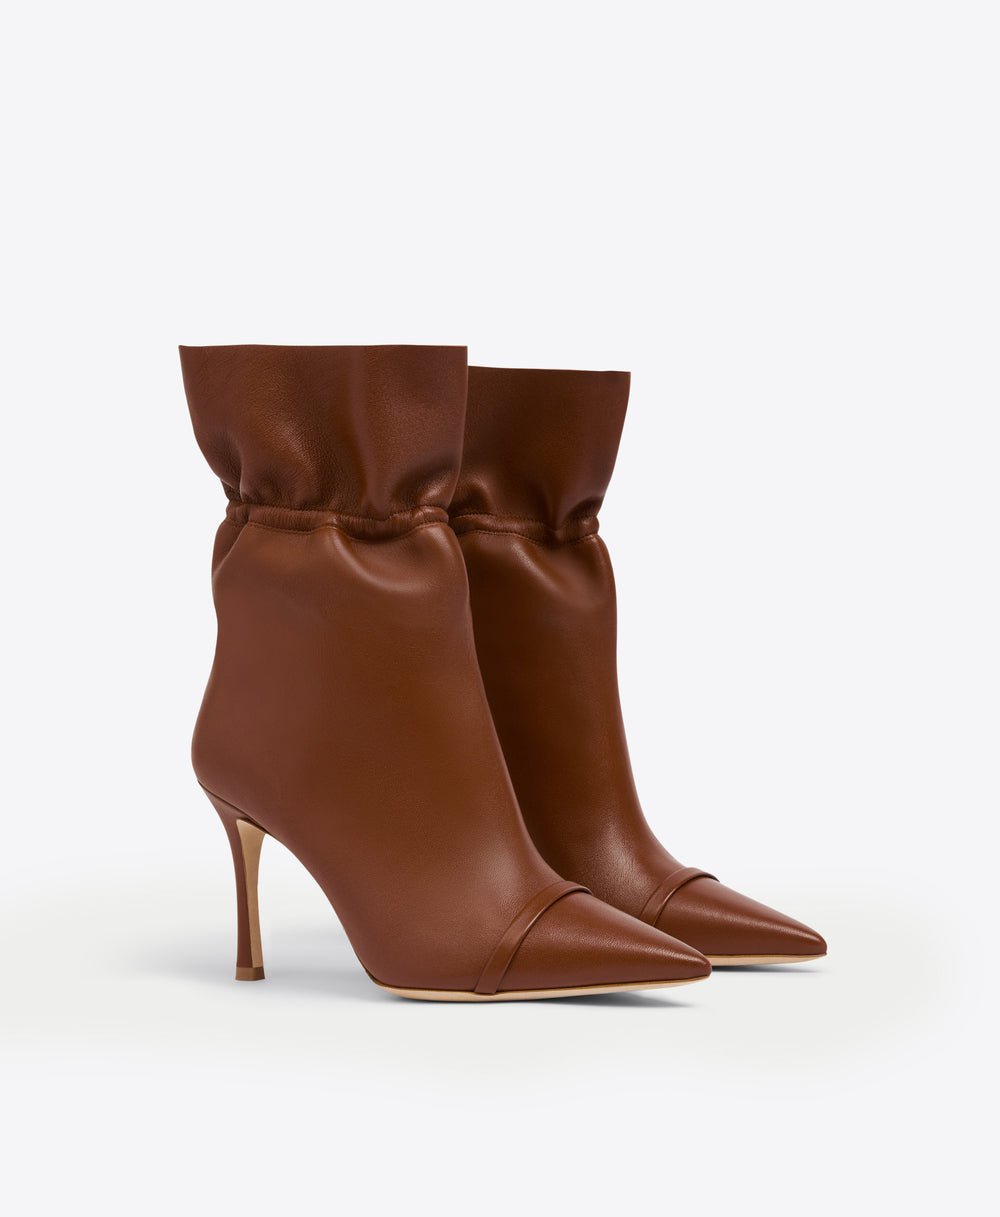 Women's Brown Leather Ankle Boots Malone Souliers